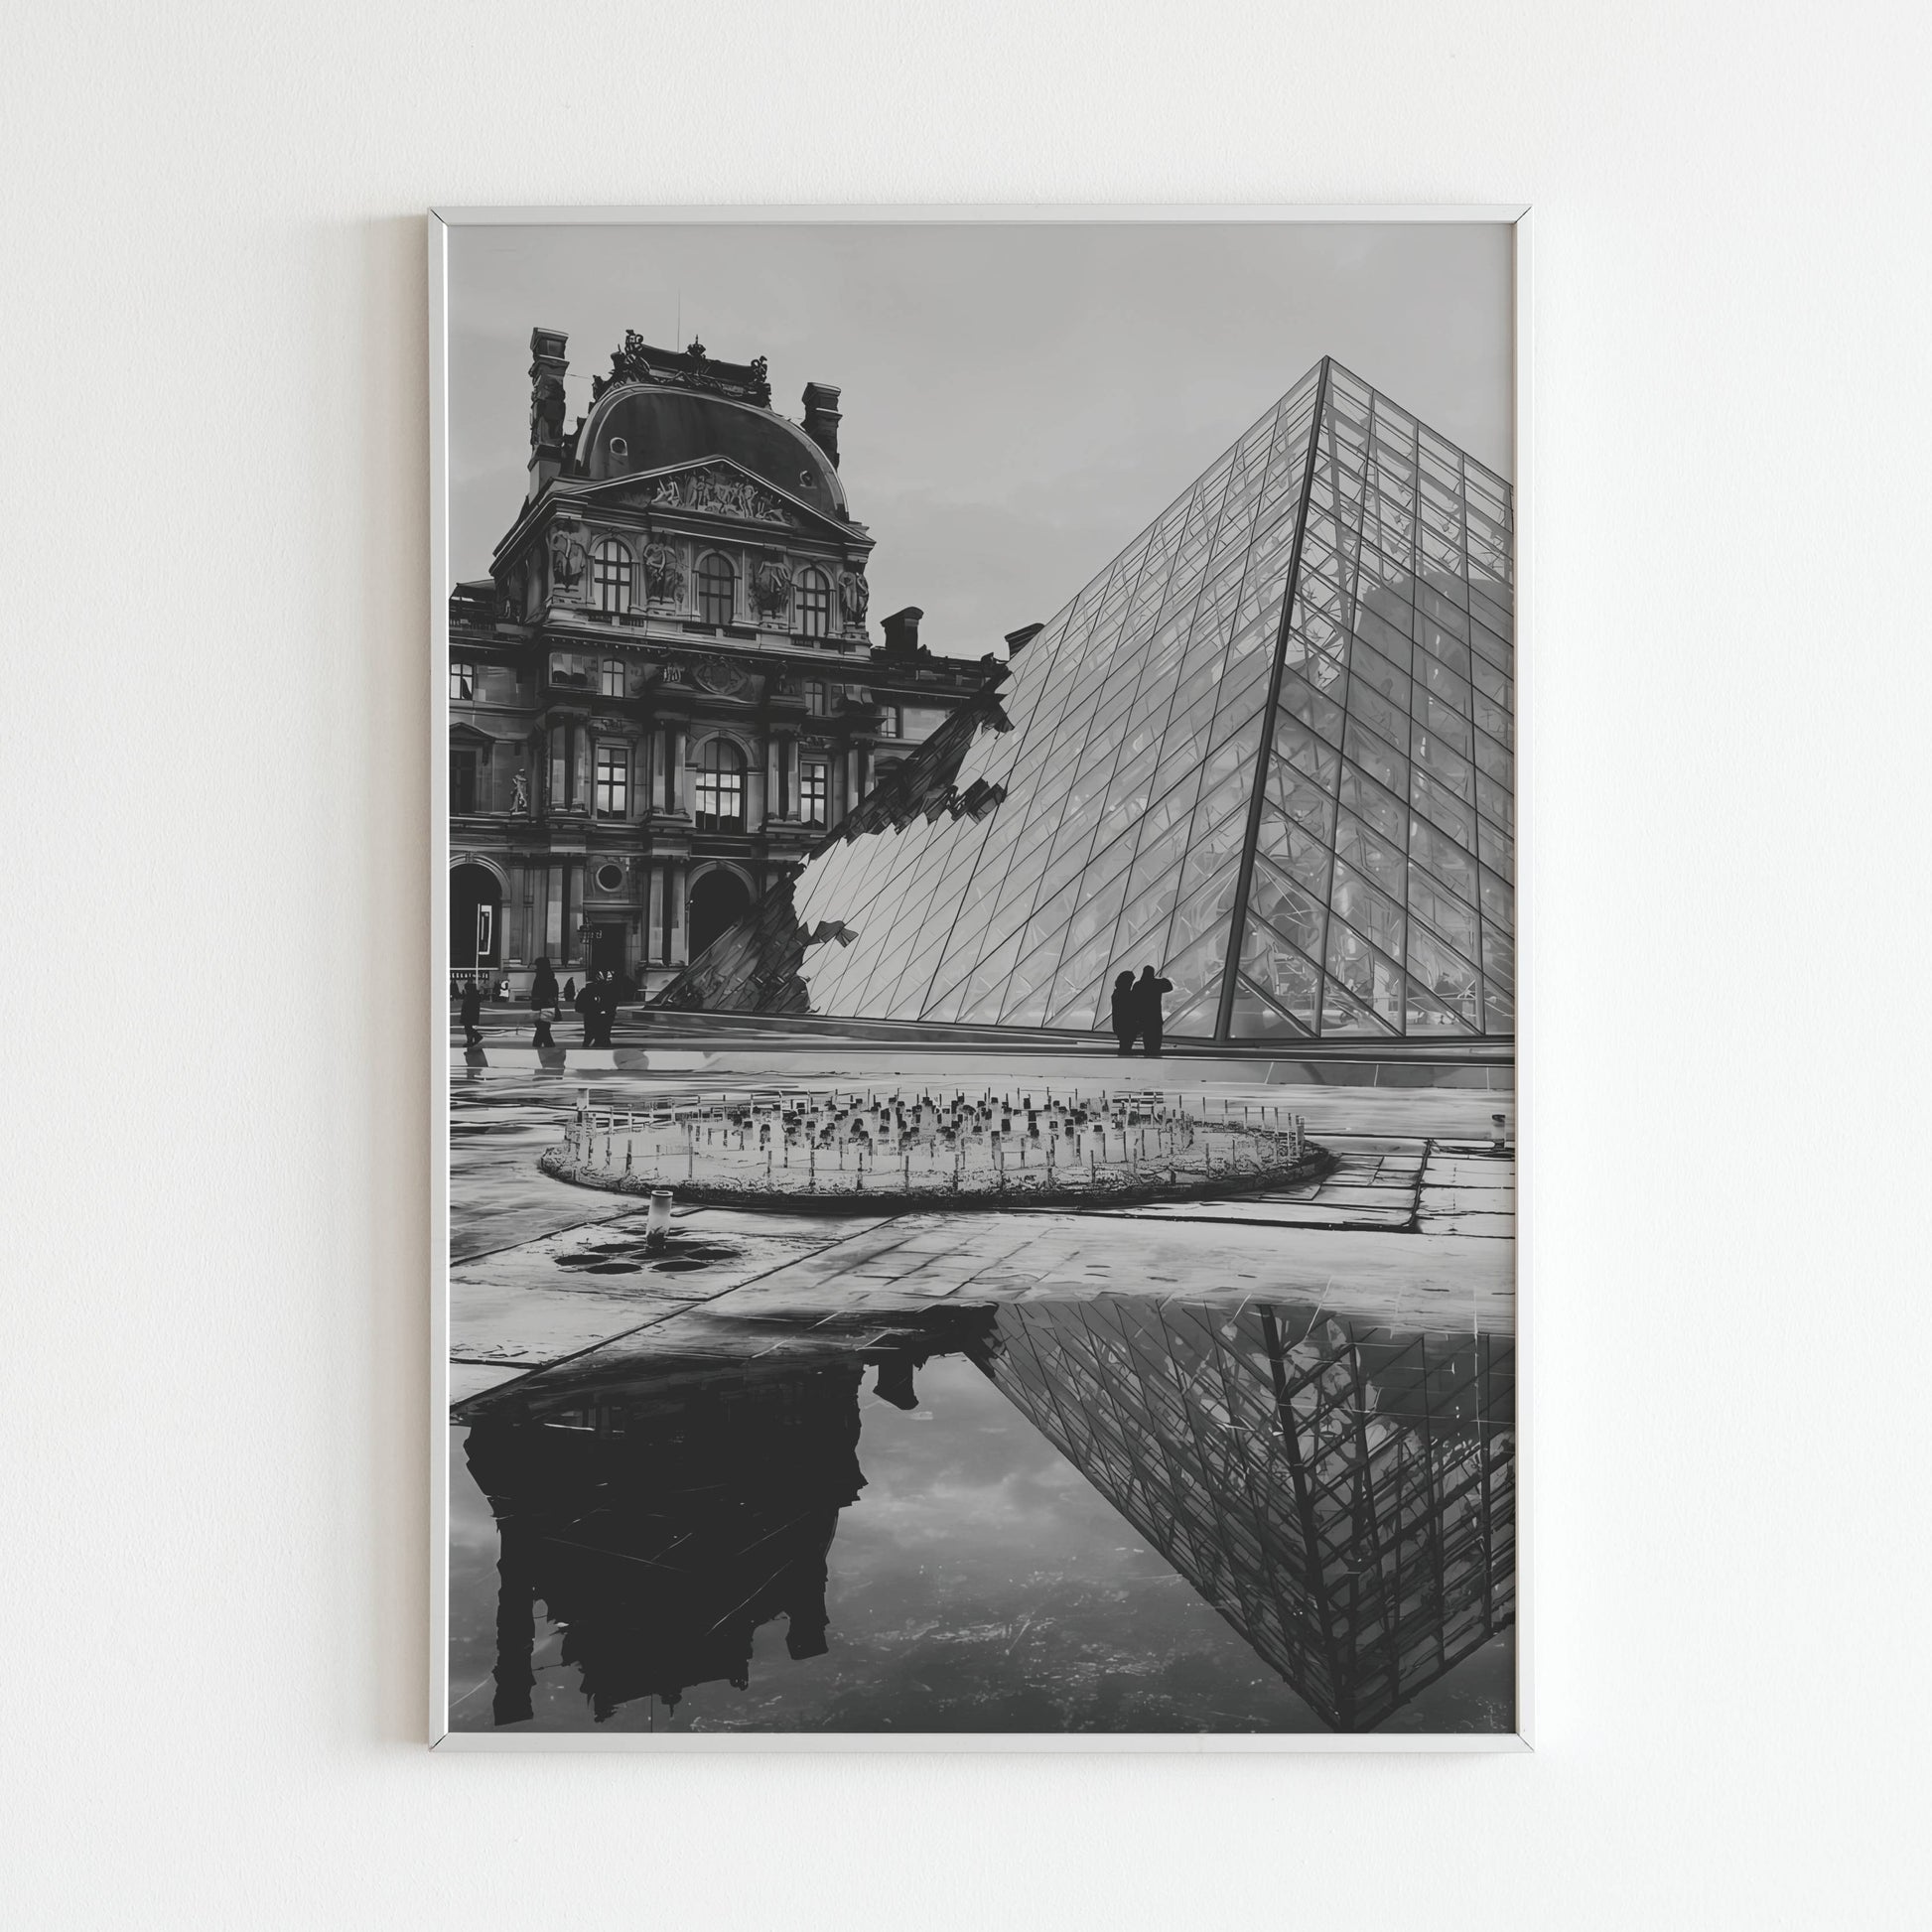 Paris Louvre Museum - Printed Wall Art / Poster. This stunning poster showcases the world-famous Louvre Museum. Arrives ready to hang.